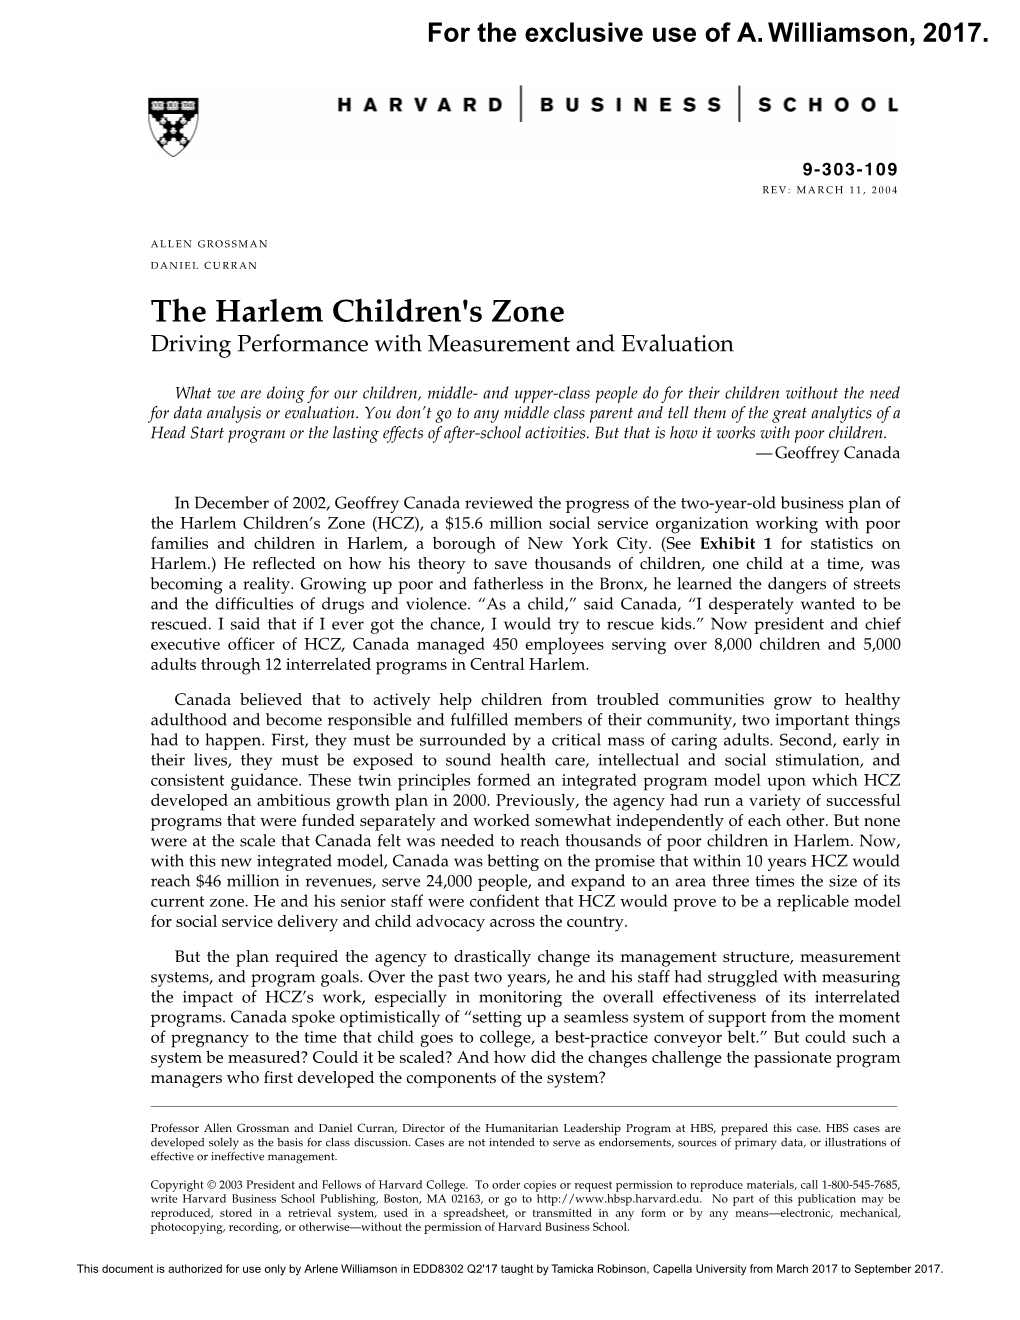 The Harlem Children's Zone Driving Performance with Measurement and Evaluation